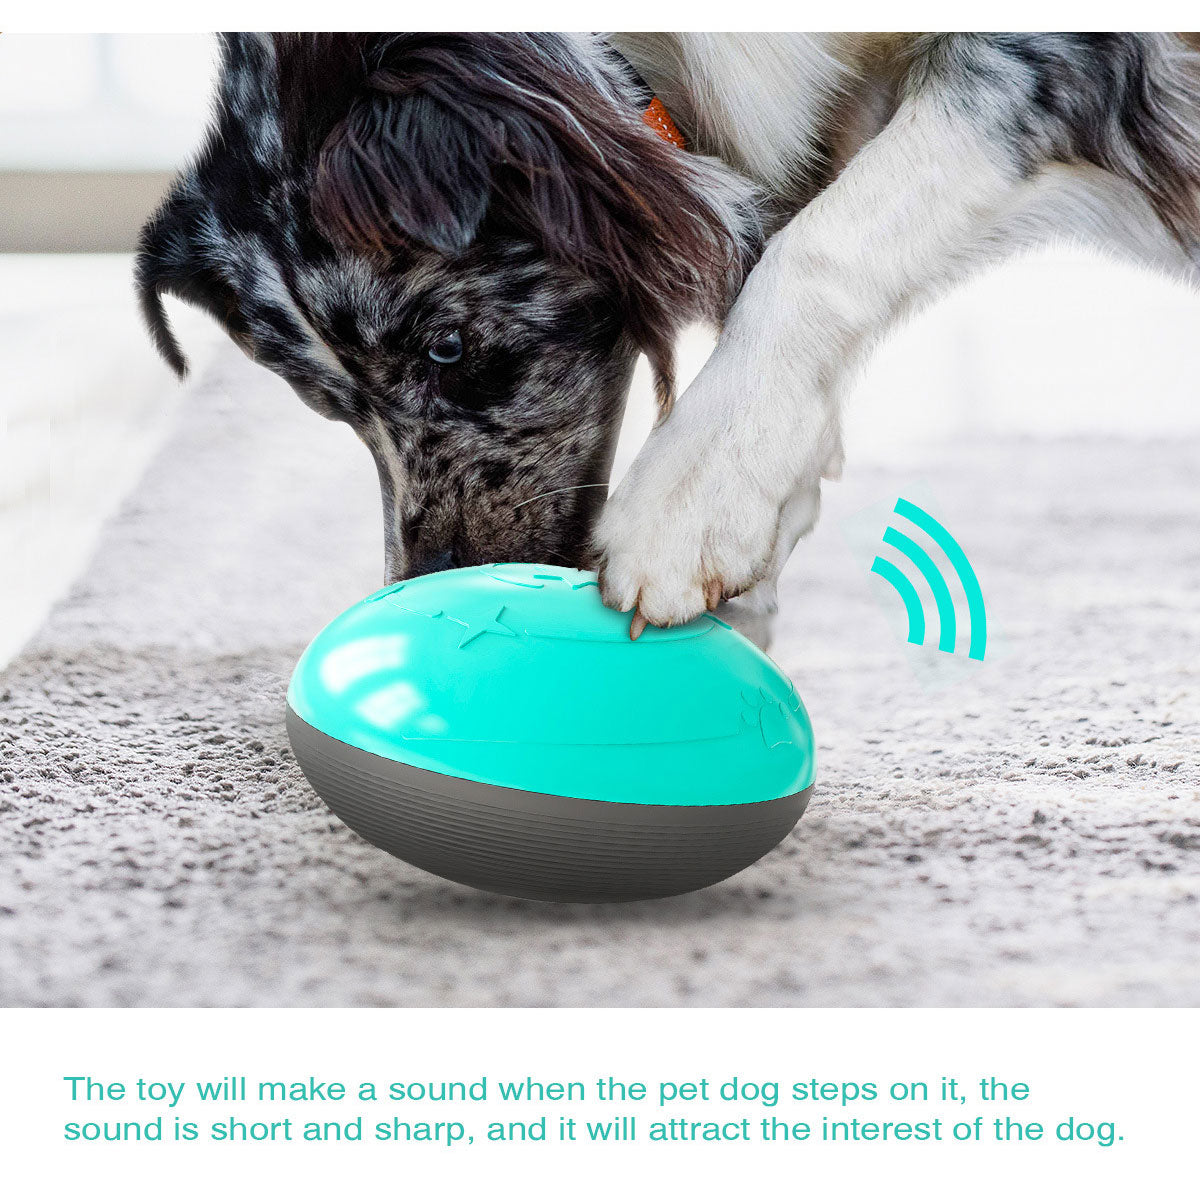 https://cdn.shopifycdn.net/s/files/1/0065/3629/8594/files/Squeaky_Dog_Toys_Interactive_Fun_Dog_Food_Bowls_Puzzle_Feeder_for_Puppies-2.jpg?v=1596009824